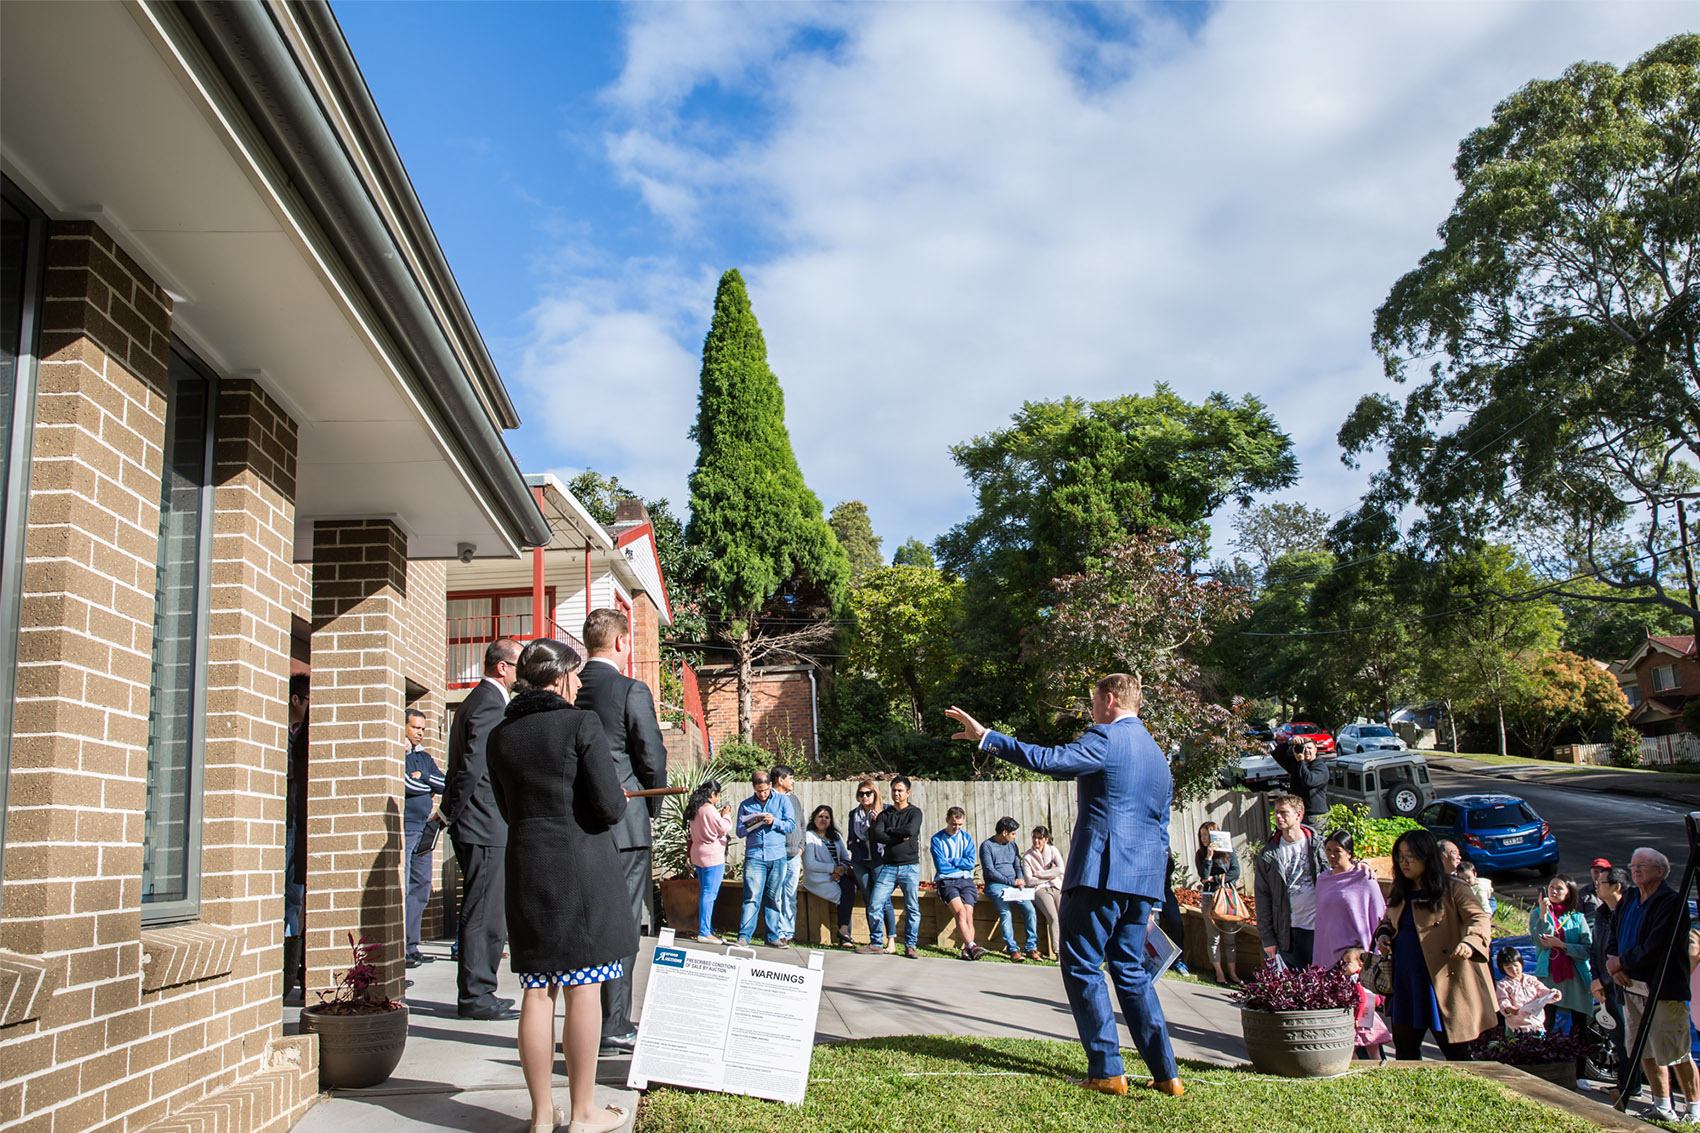 Axford Auctions | Sydney's Leading Auctioneer